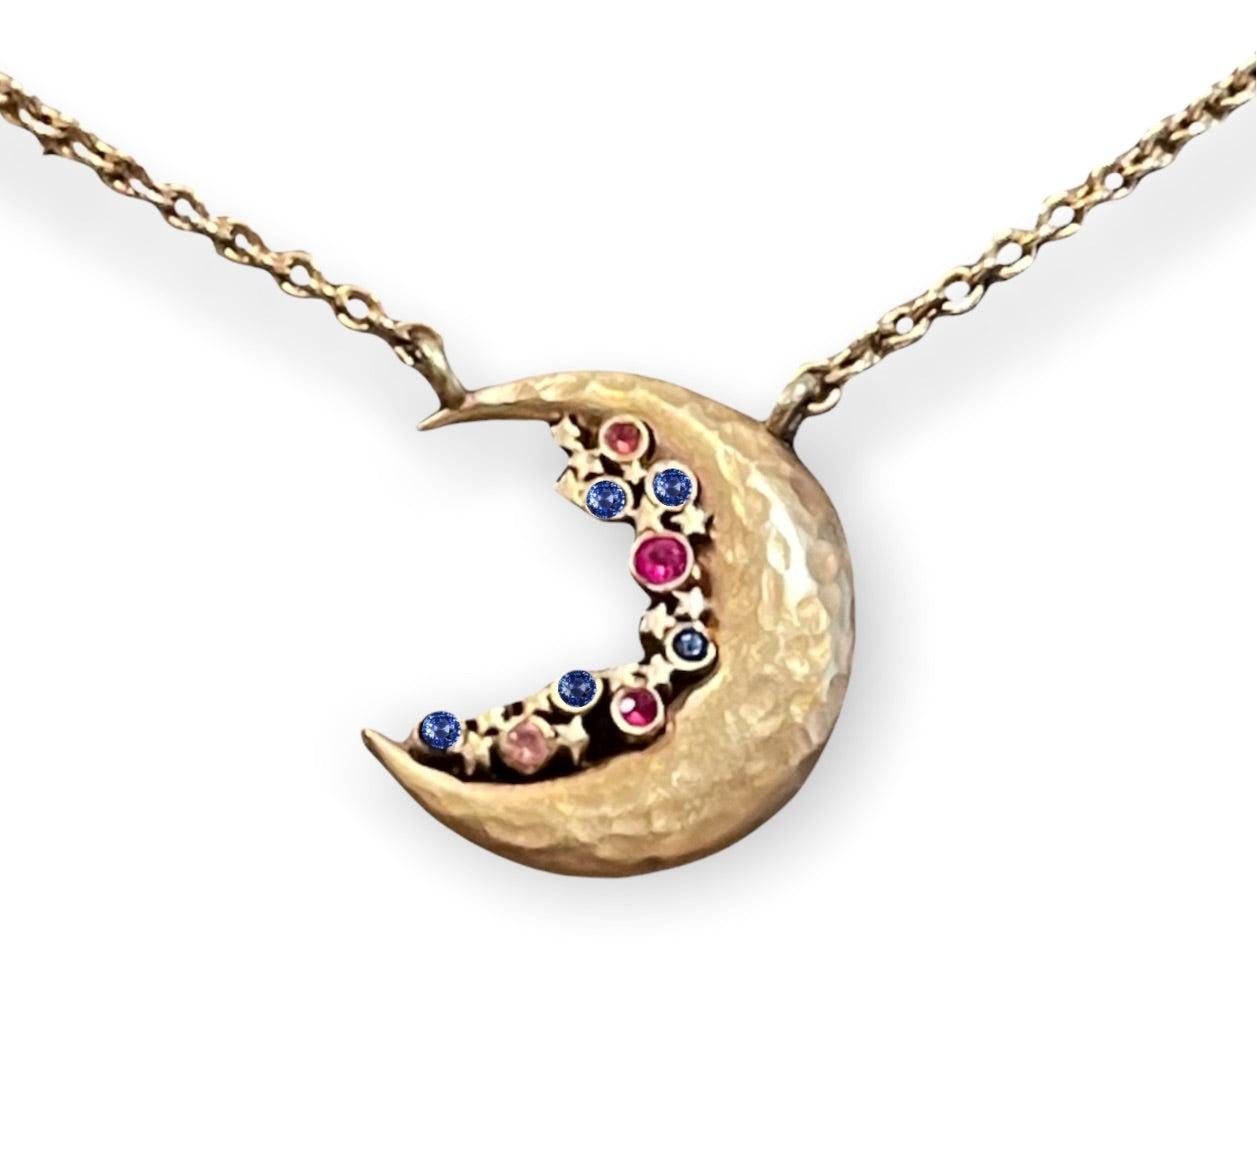 Brilliant Cut Moon Crescent Sapphire Constellation Necklace in 14K Yellow Gold